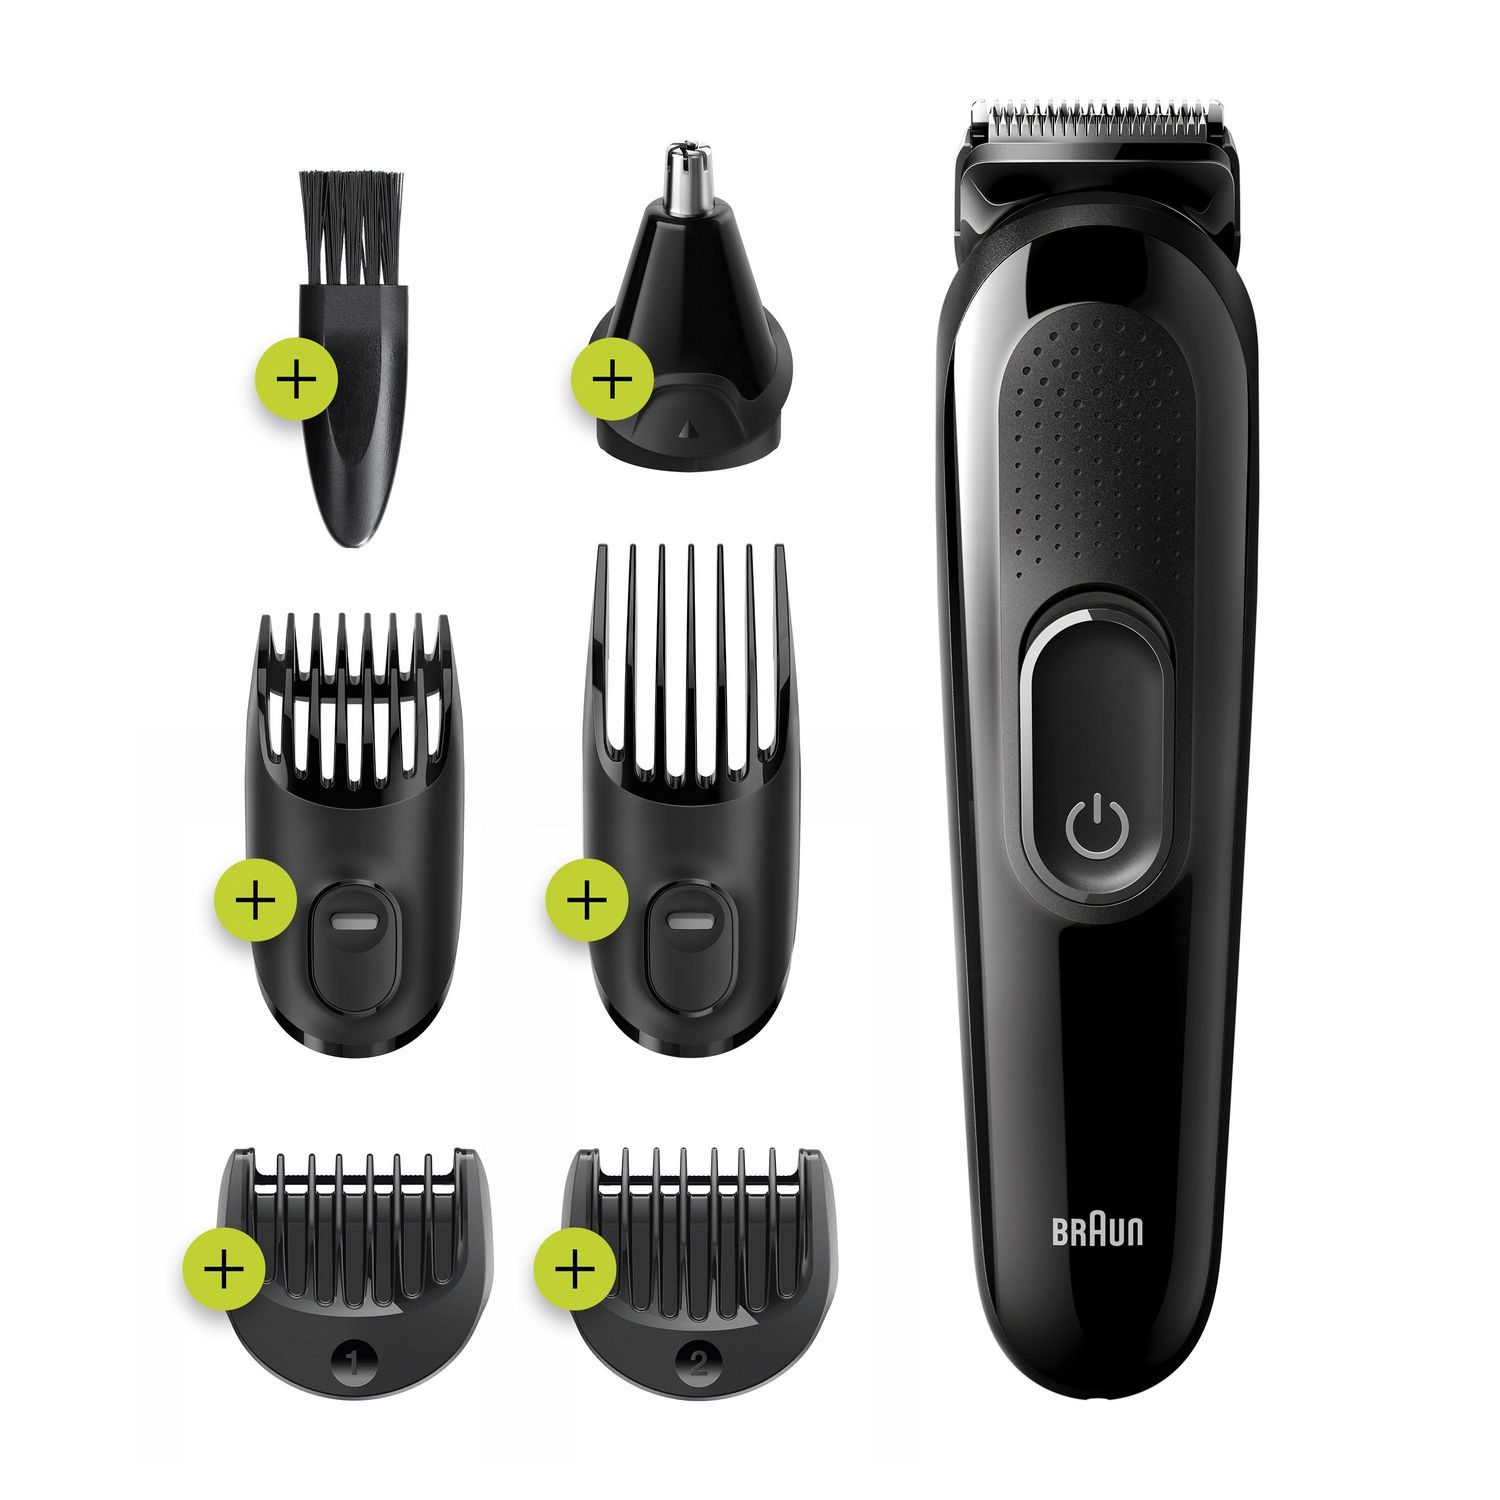 size 2 trimmer in mm